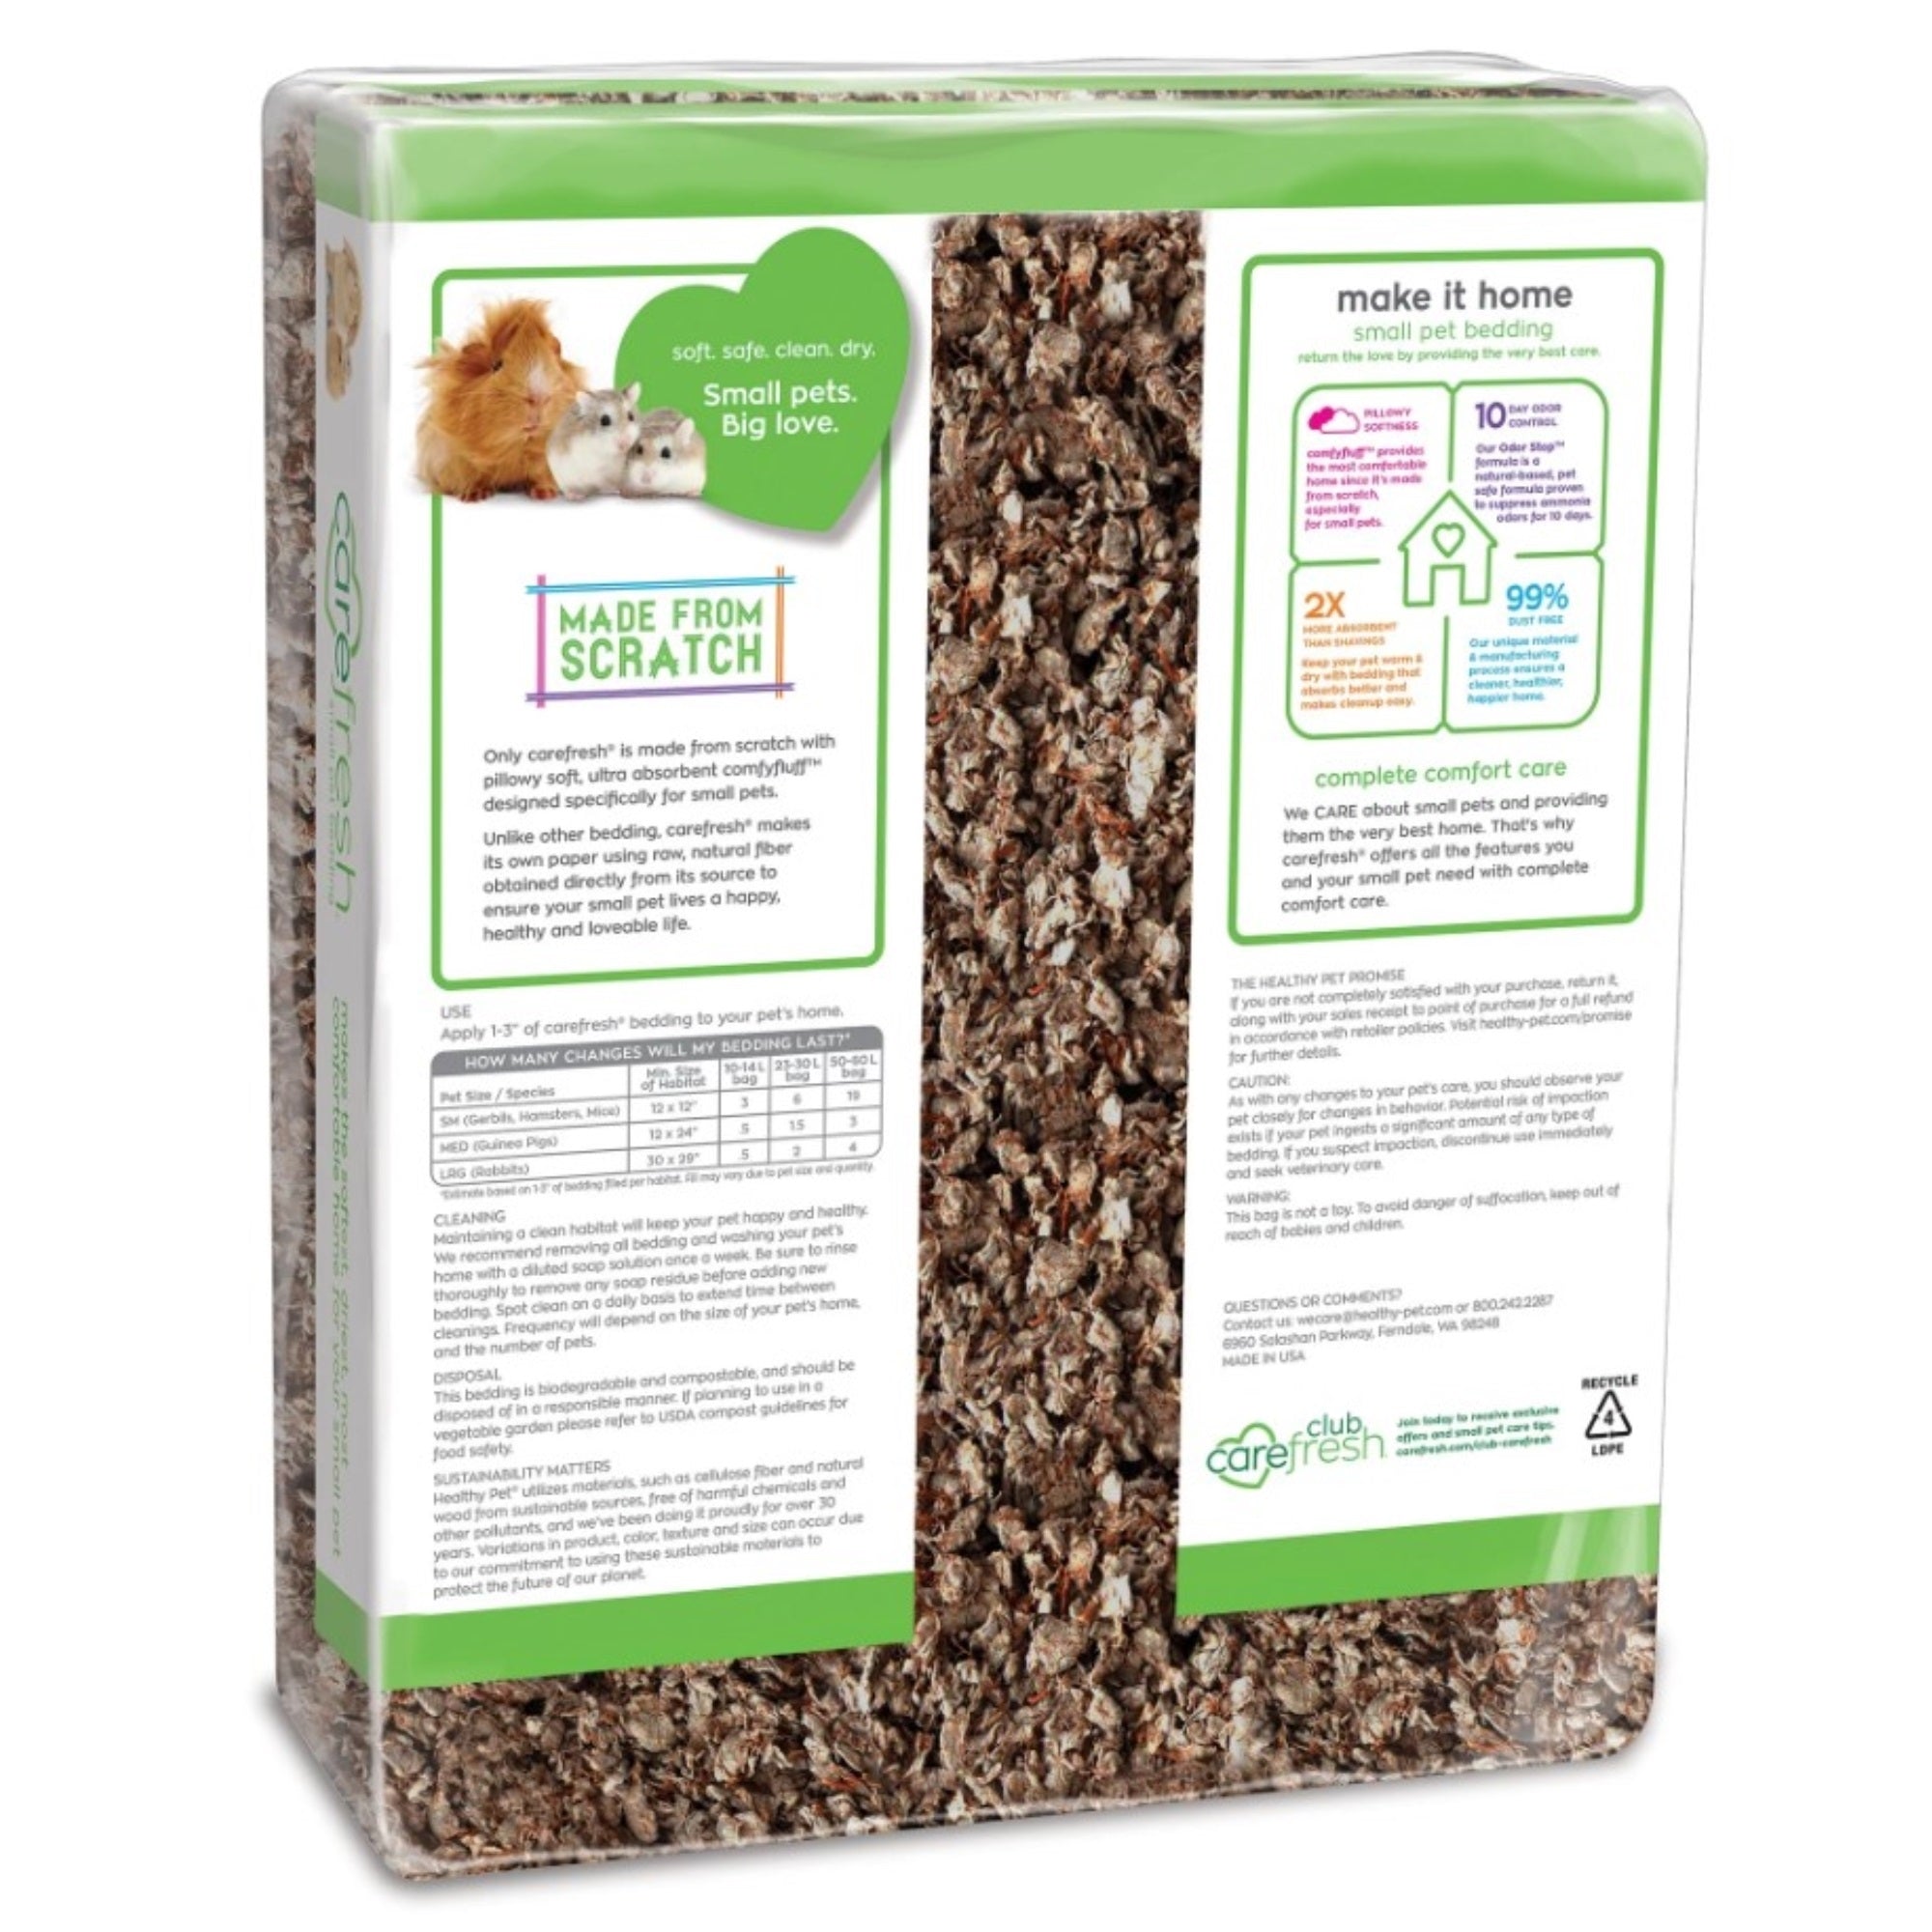 Carefresh Small Pet Soft Paper Bedding, Natural, 60L